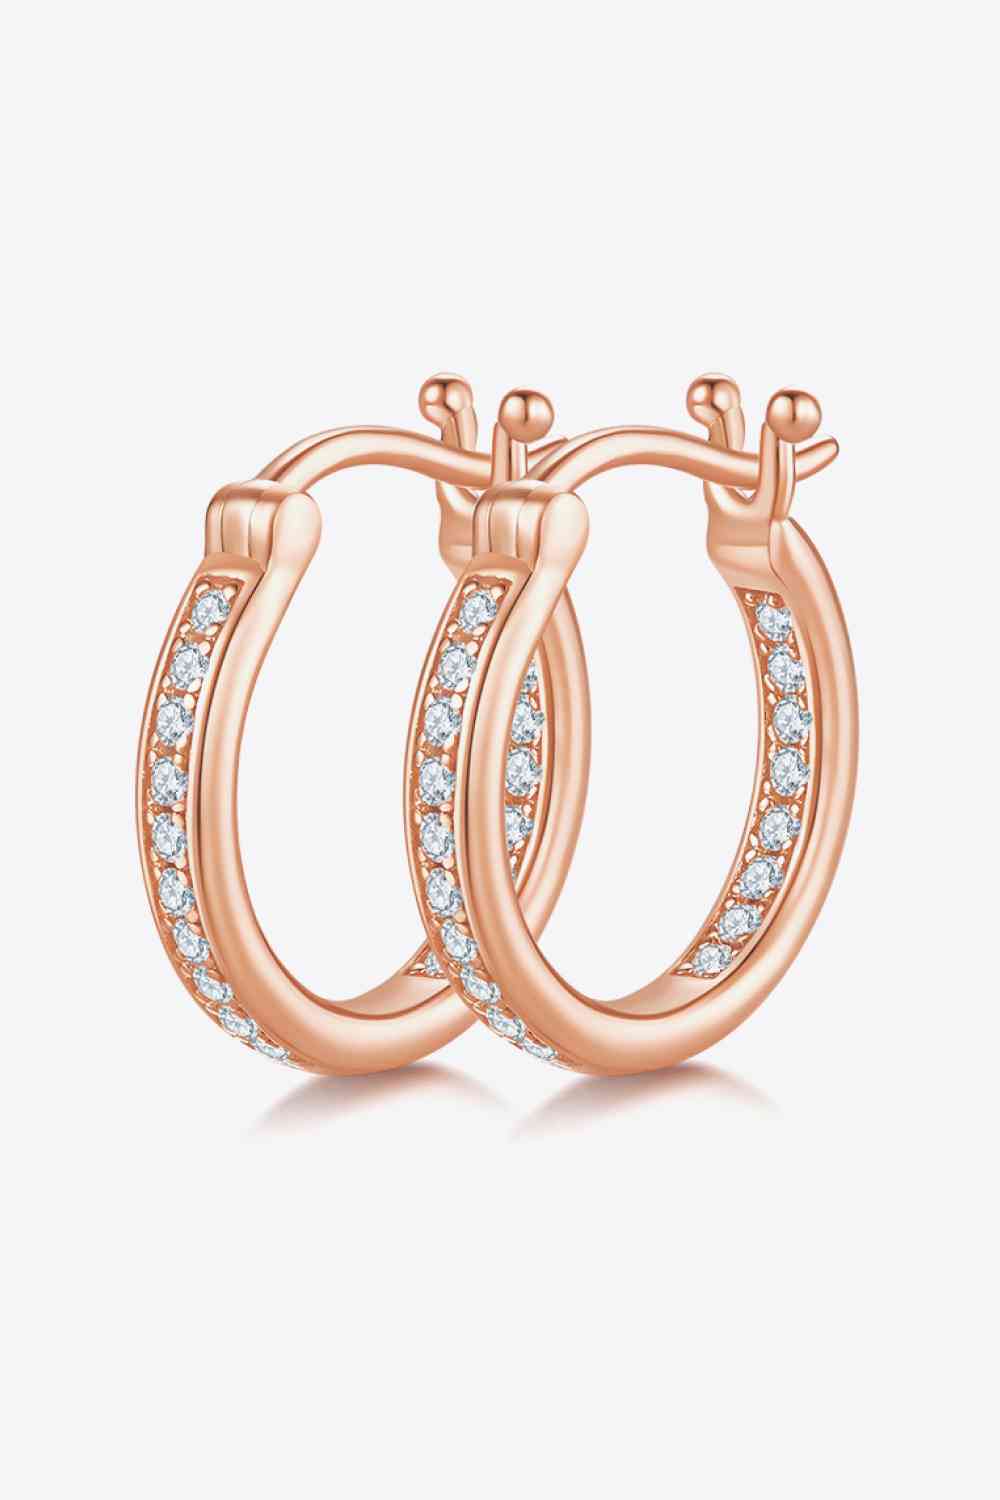 Adored Moissanite 925 Sterling Silver Earrings Rose Gold One Size